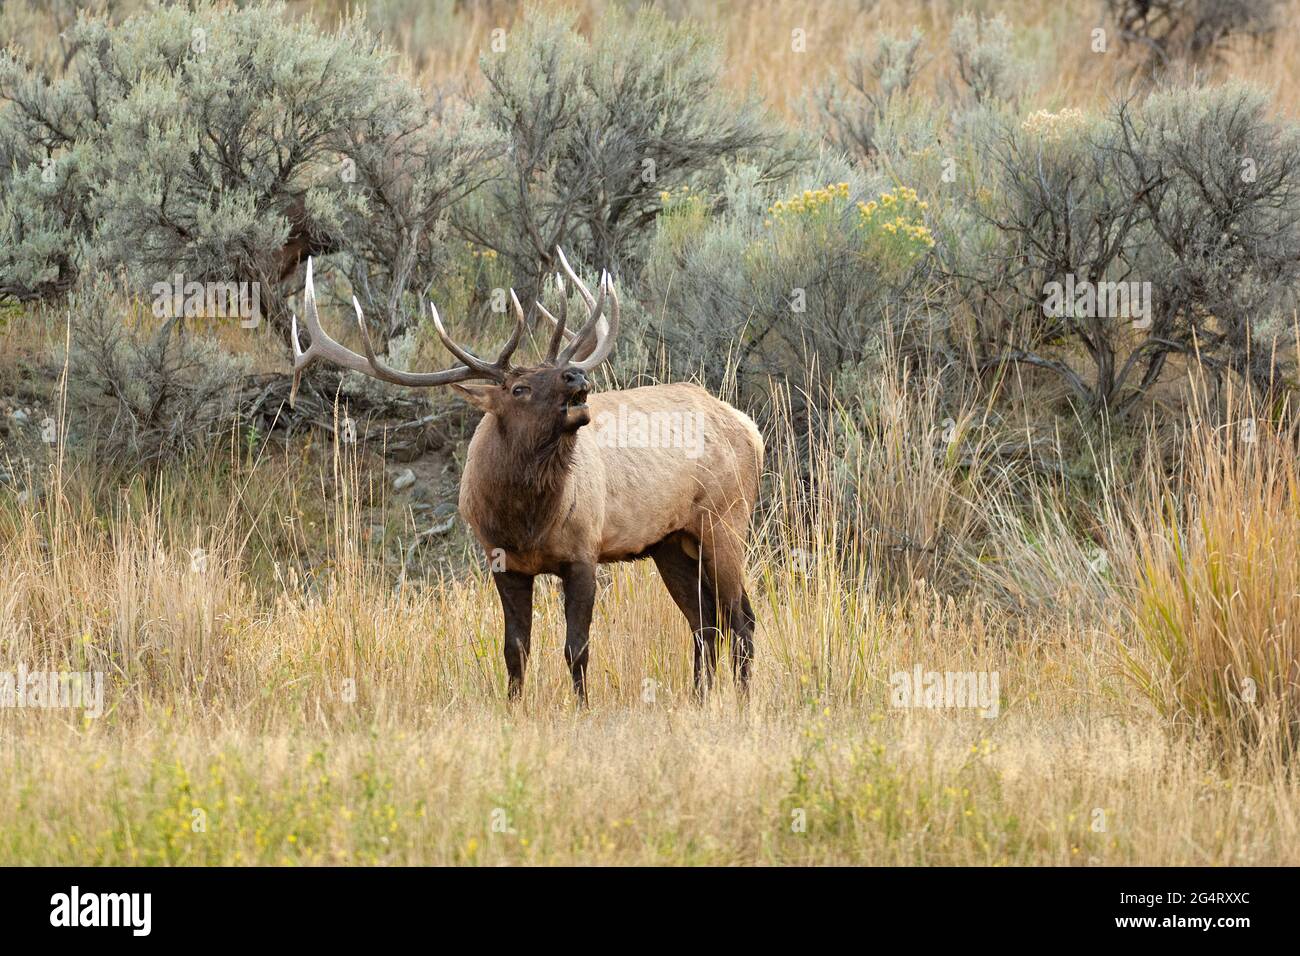 Bull Elk (Cervus canadensis) bugling during the rut. Yellowstone National Park, Wyoming, USA. Stock Photo